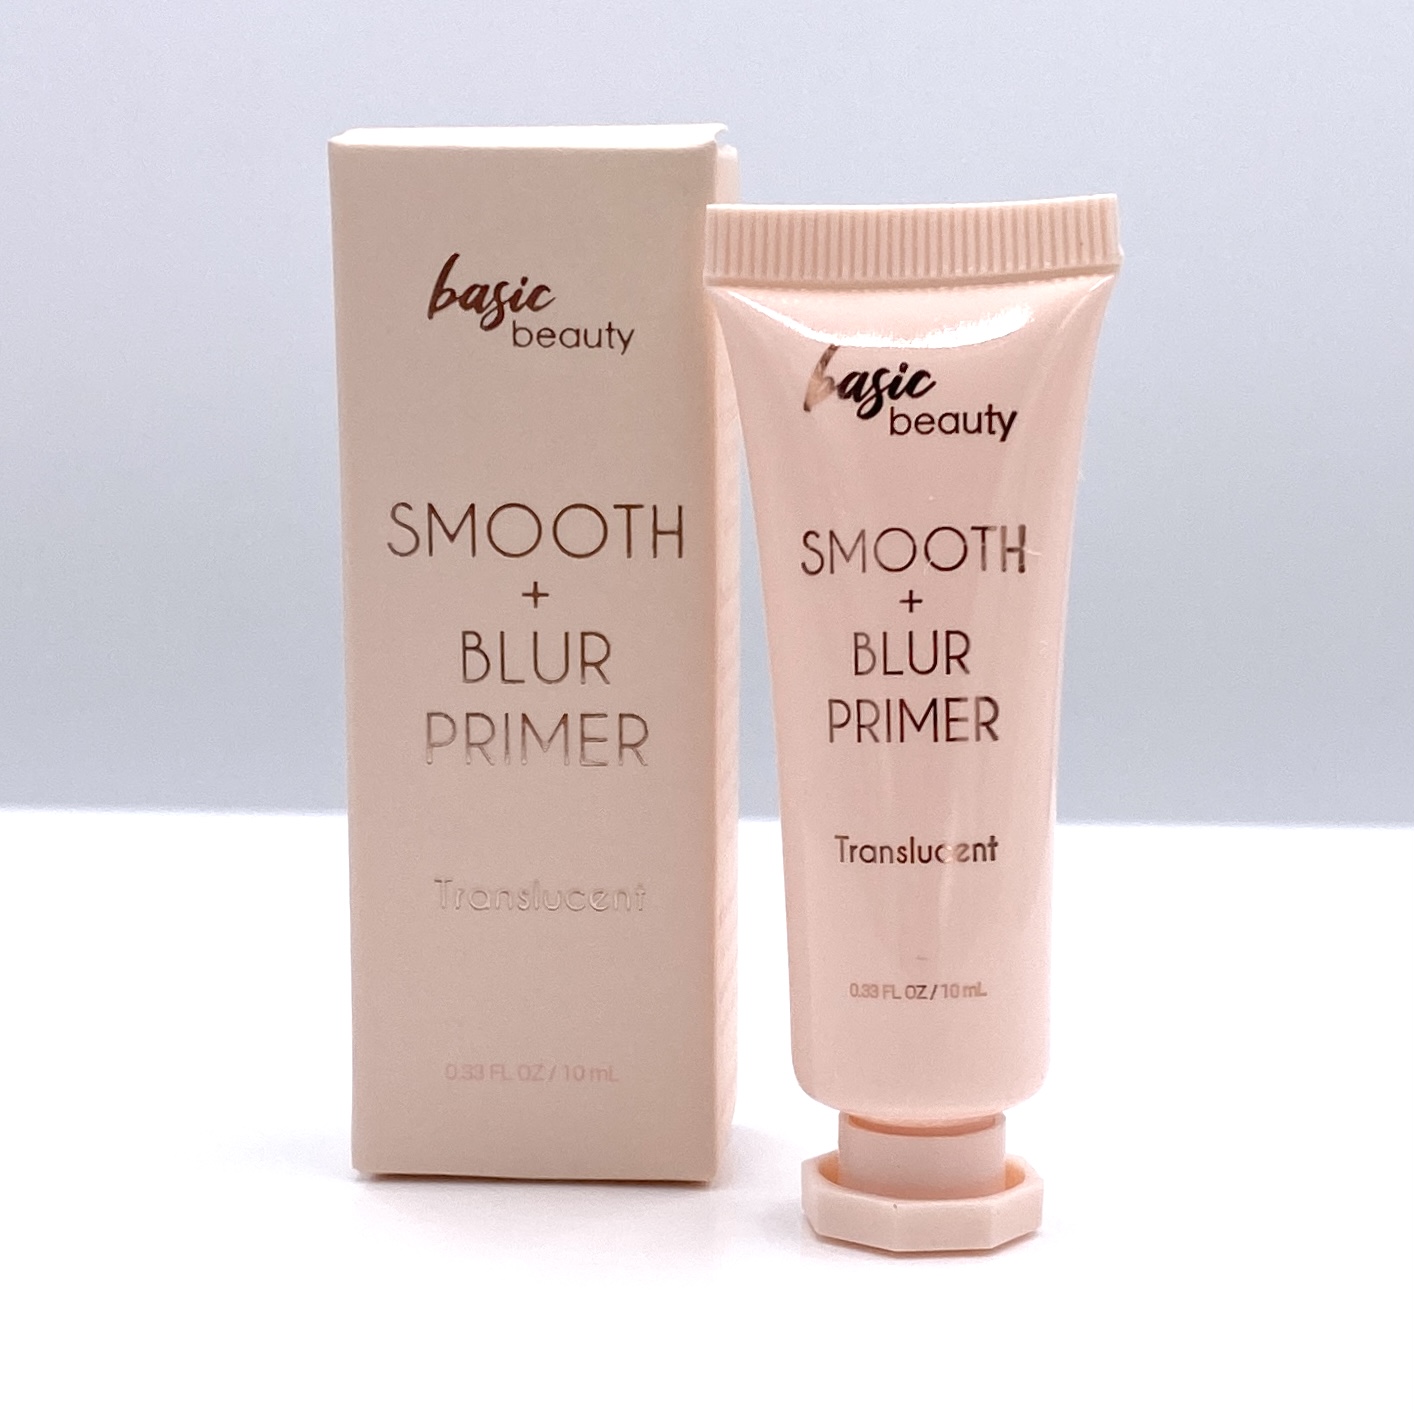 The front of the box and bottle for Basic Beauty Translucent Primer from the Ipsy Glam Bag May 2021.